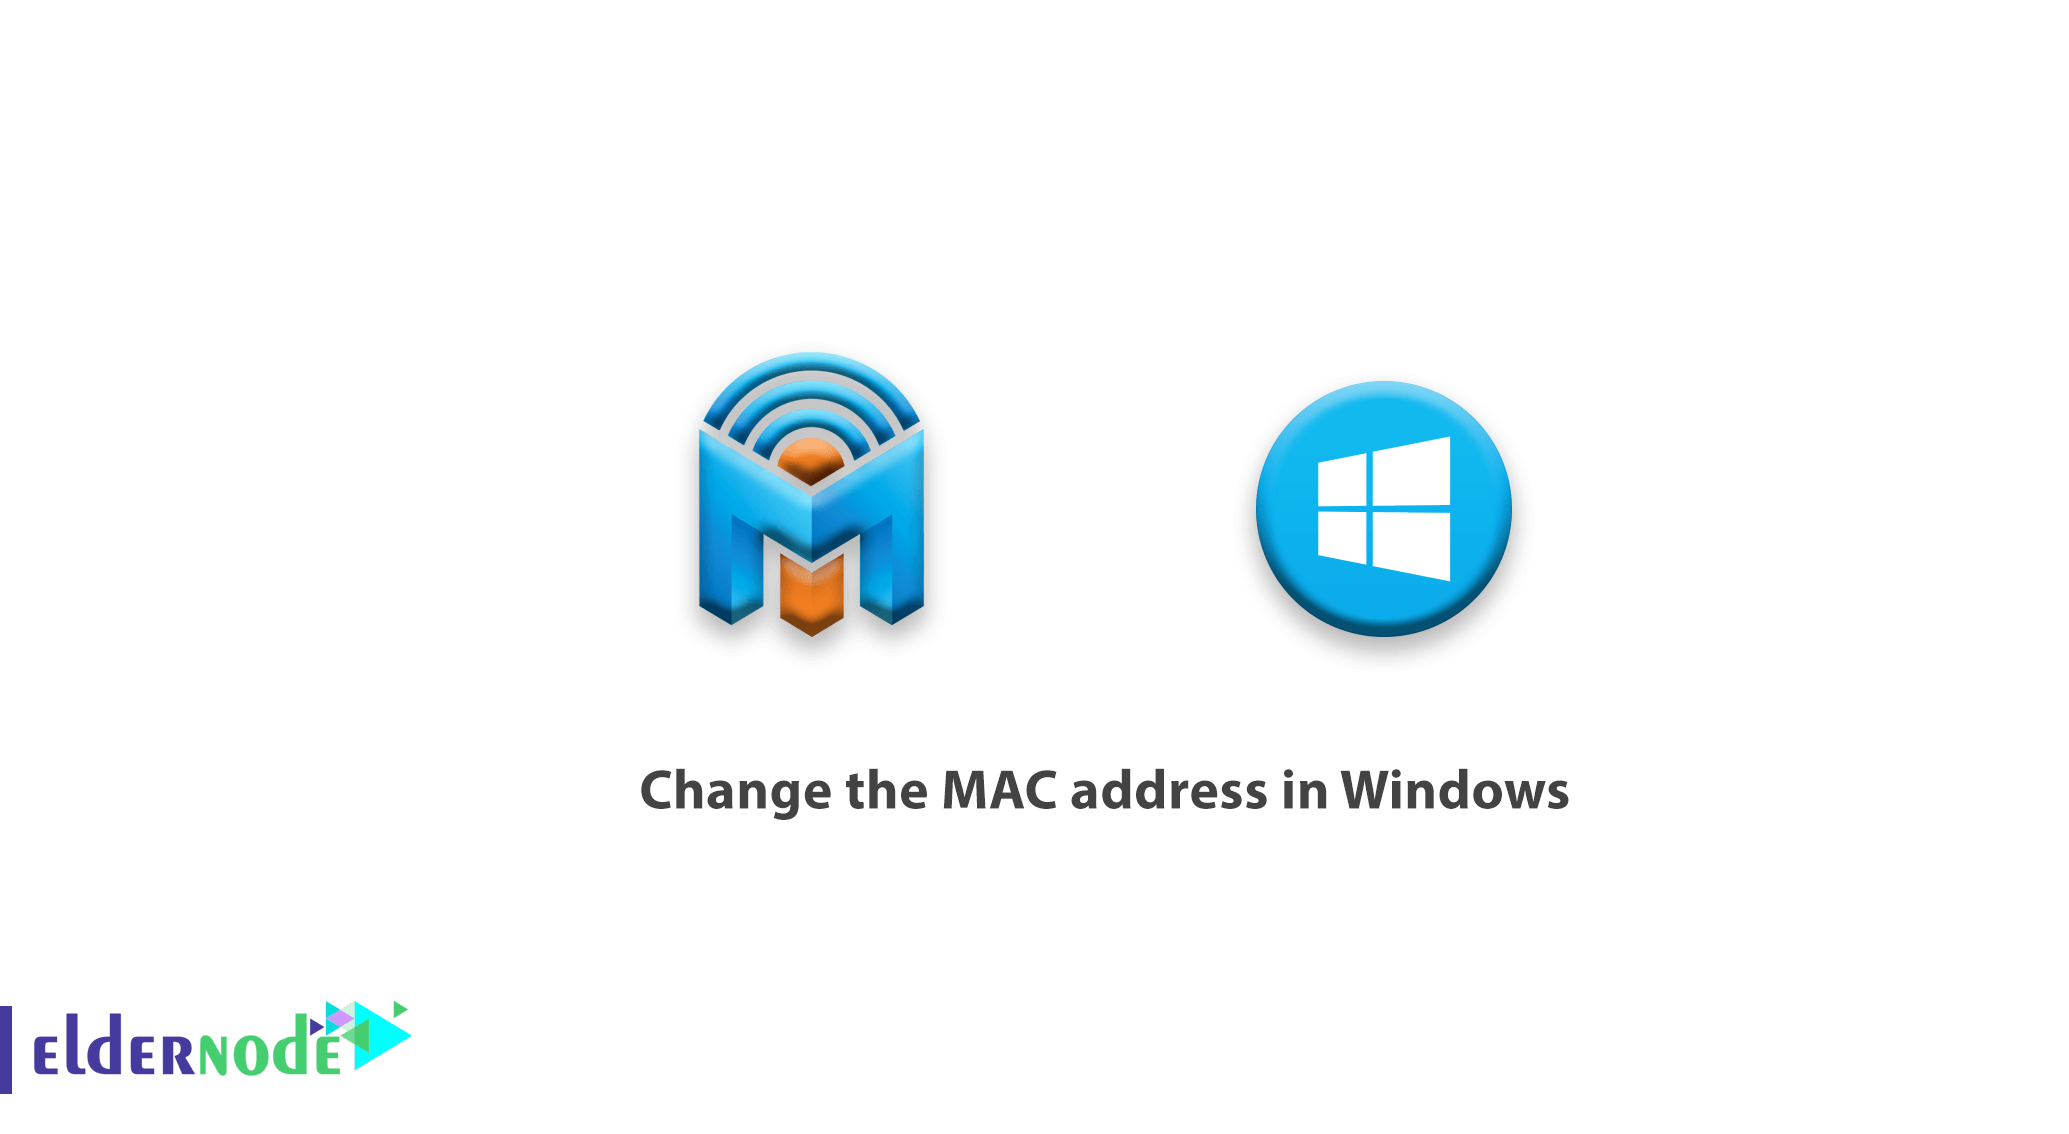 How to change the MAC address in Windows